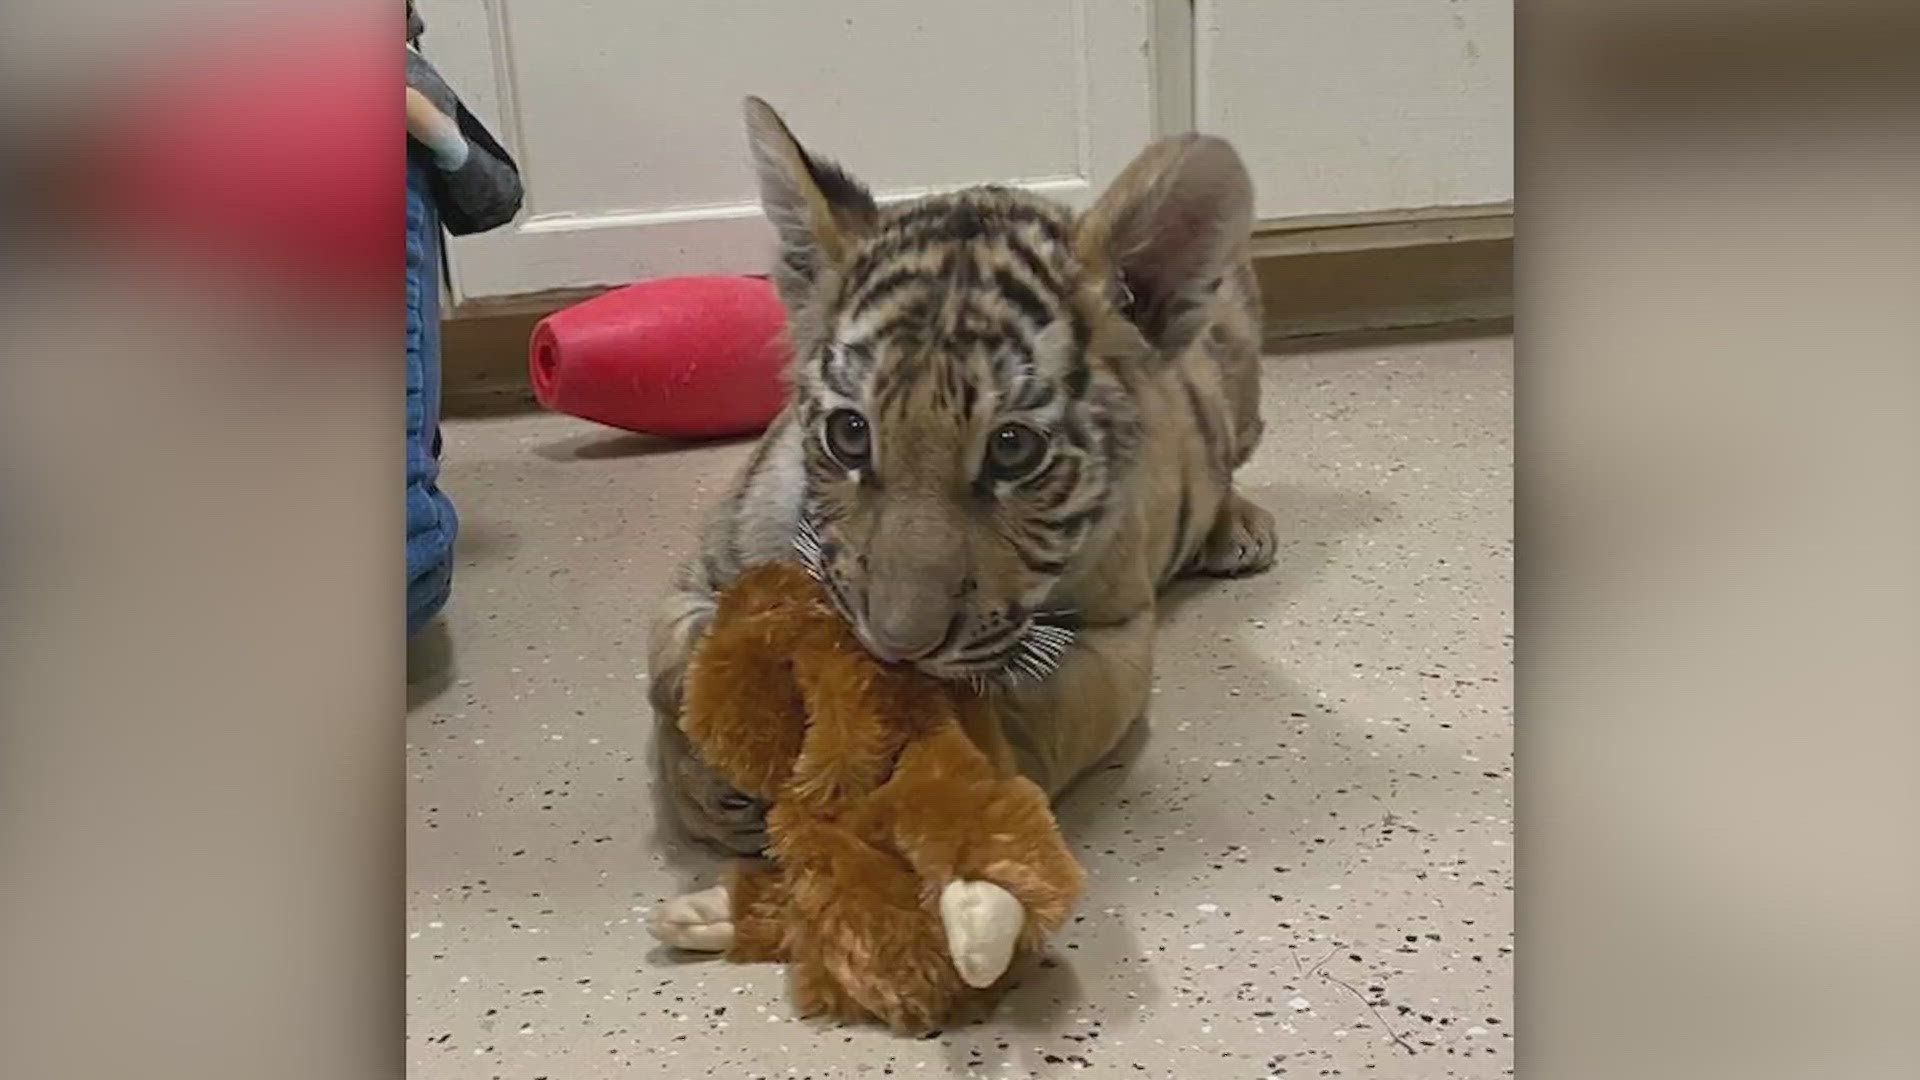 According to officials at Sandstone's The Wildcat Sanctuary, a 25-year-old Phoenix man put the cub, Indy, up for sale online for $25,000 earlier this year.